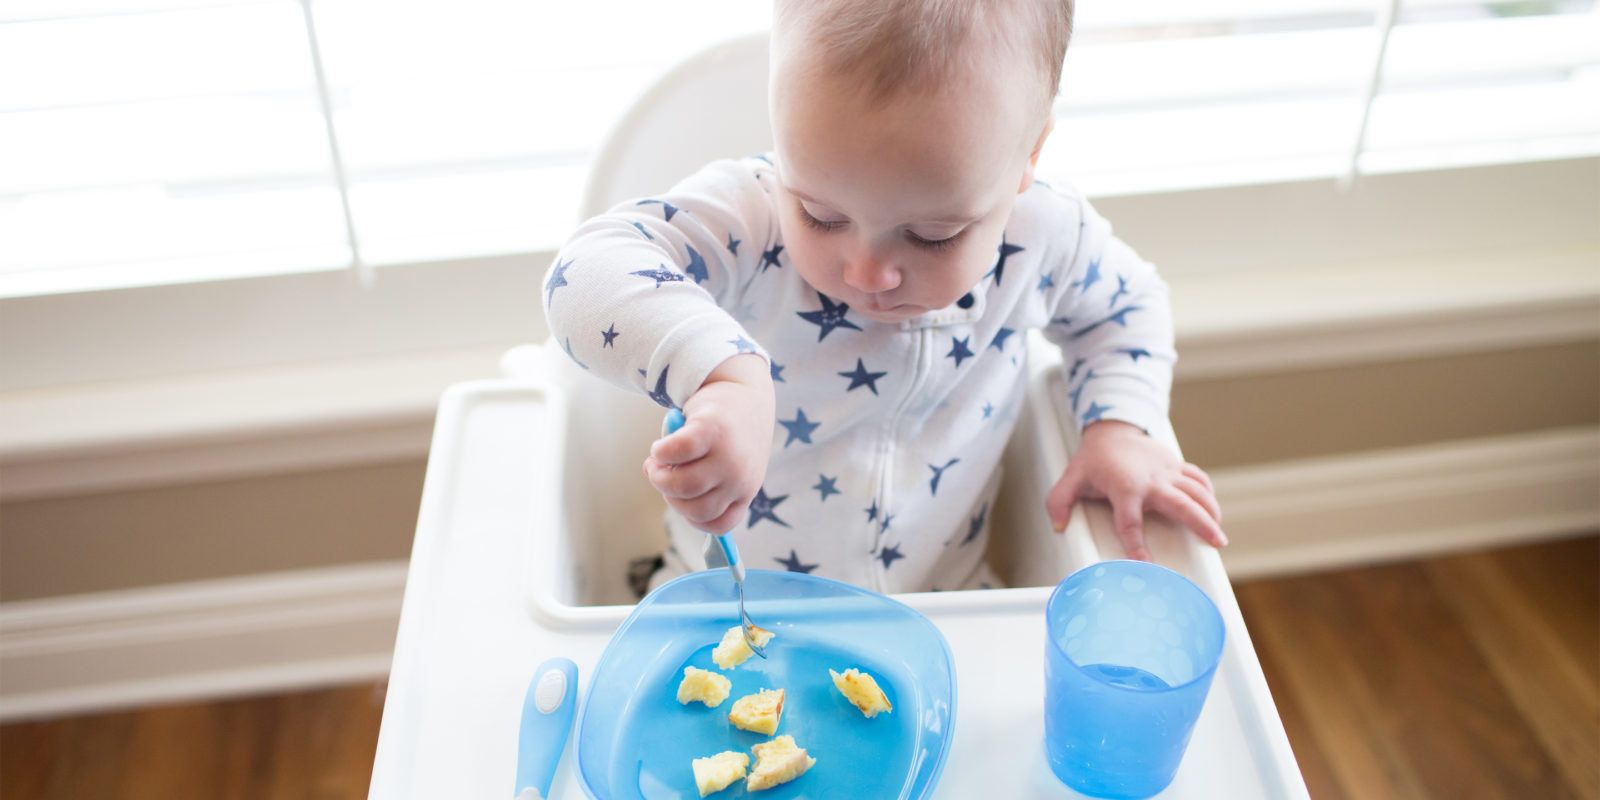 Baby in highchair using form to eat bananas from plate